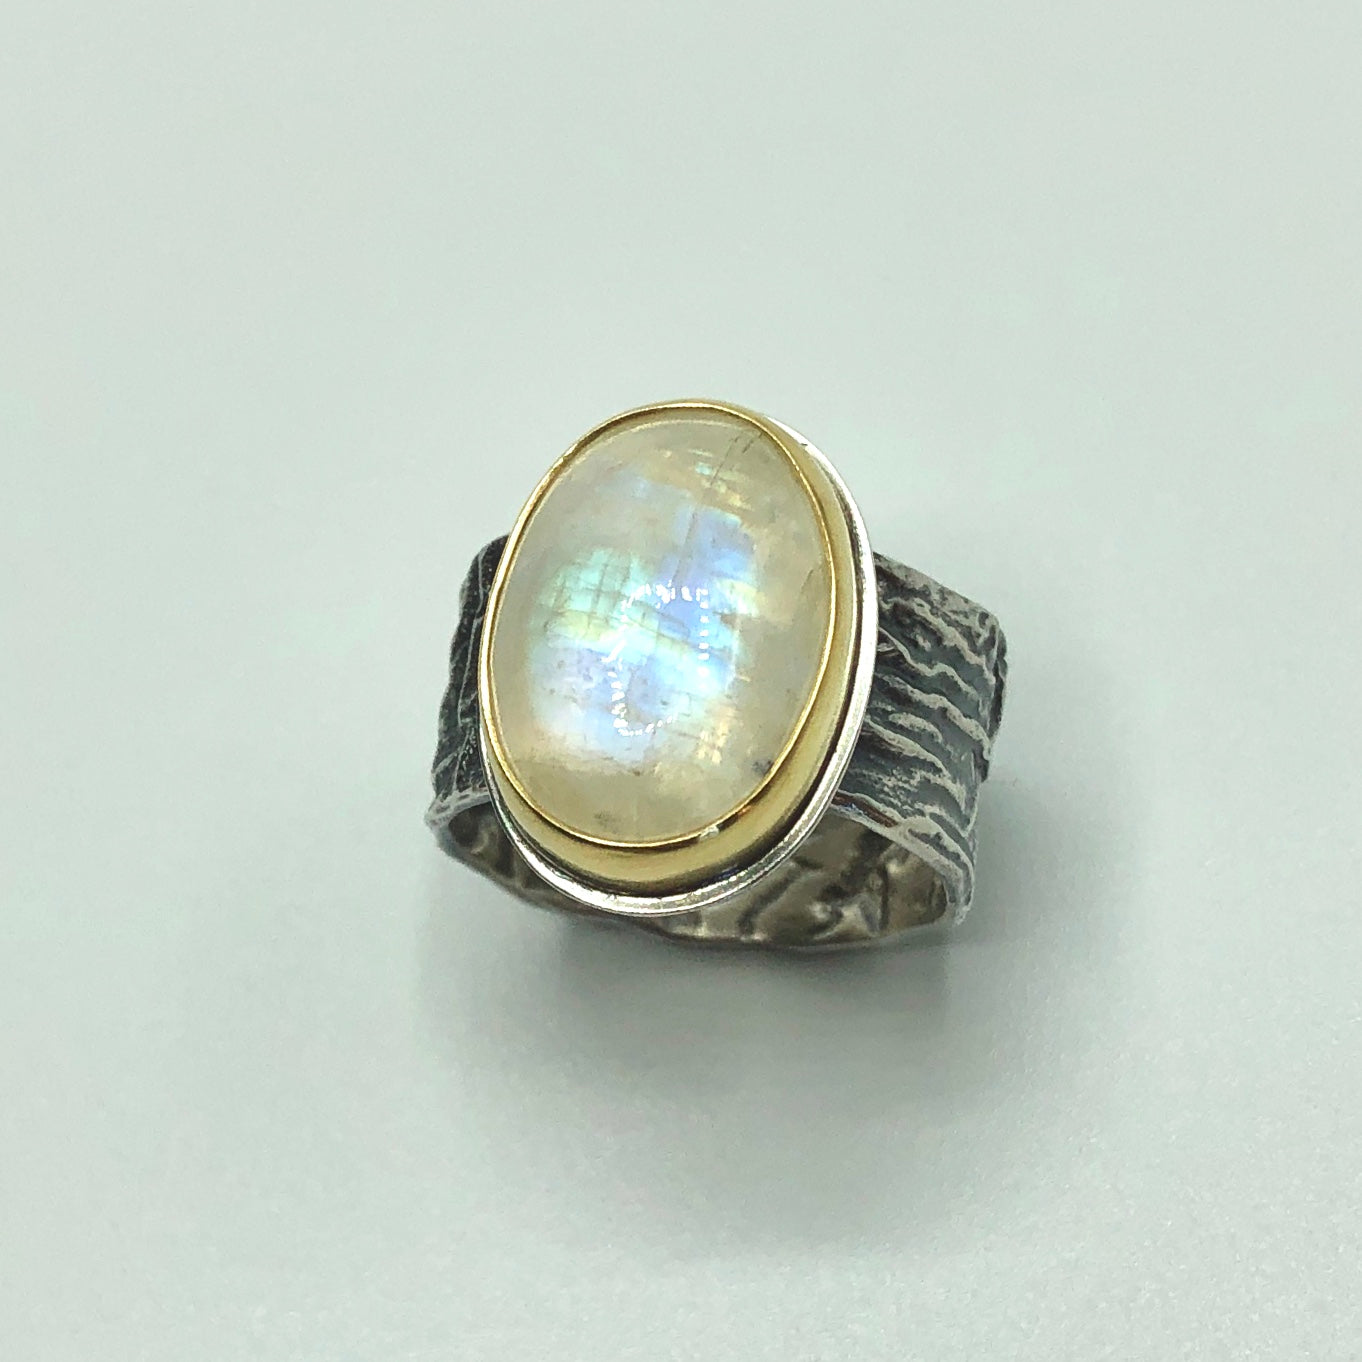 Rainbow Moonstone set in 18k gold bezel and reticulated silver band